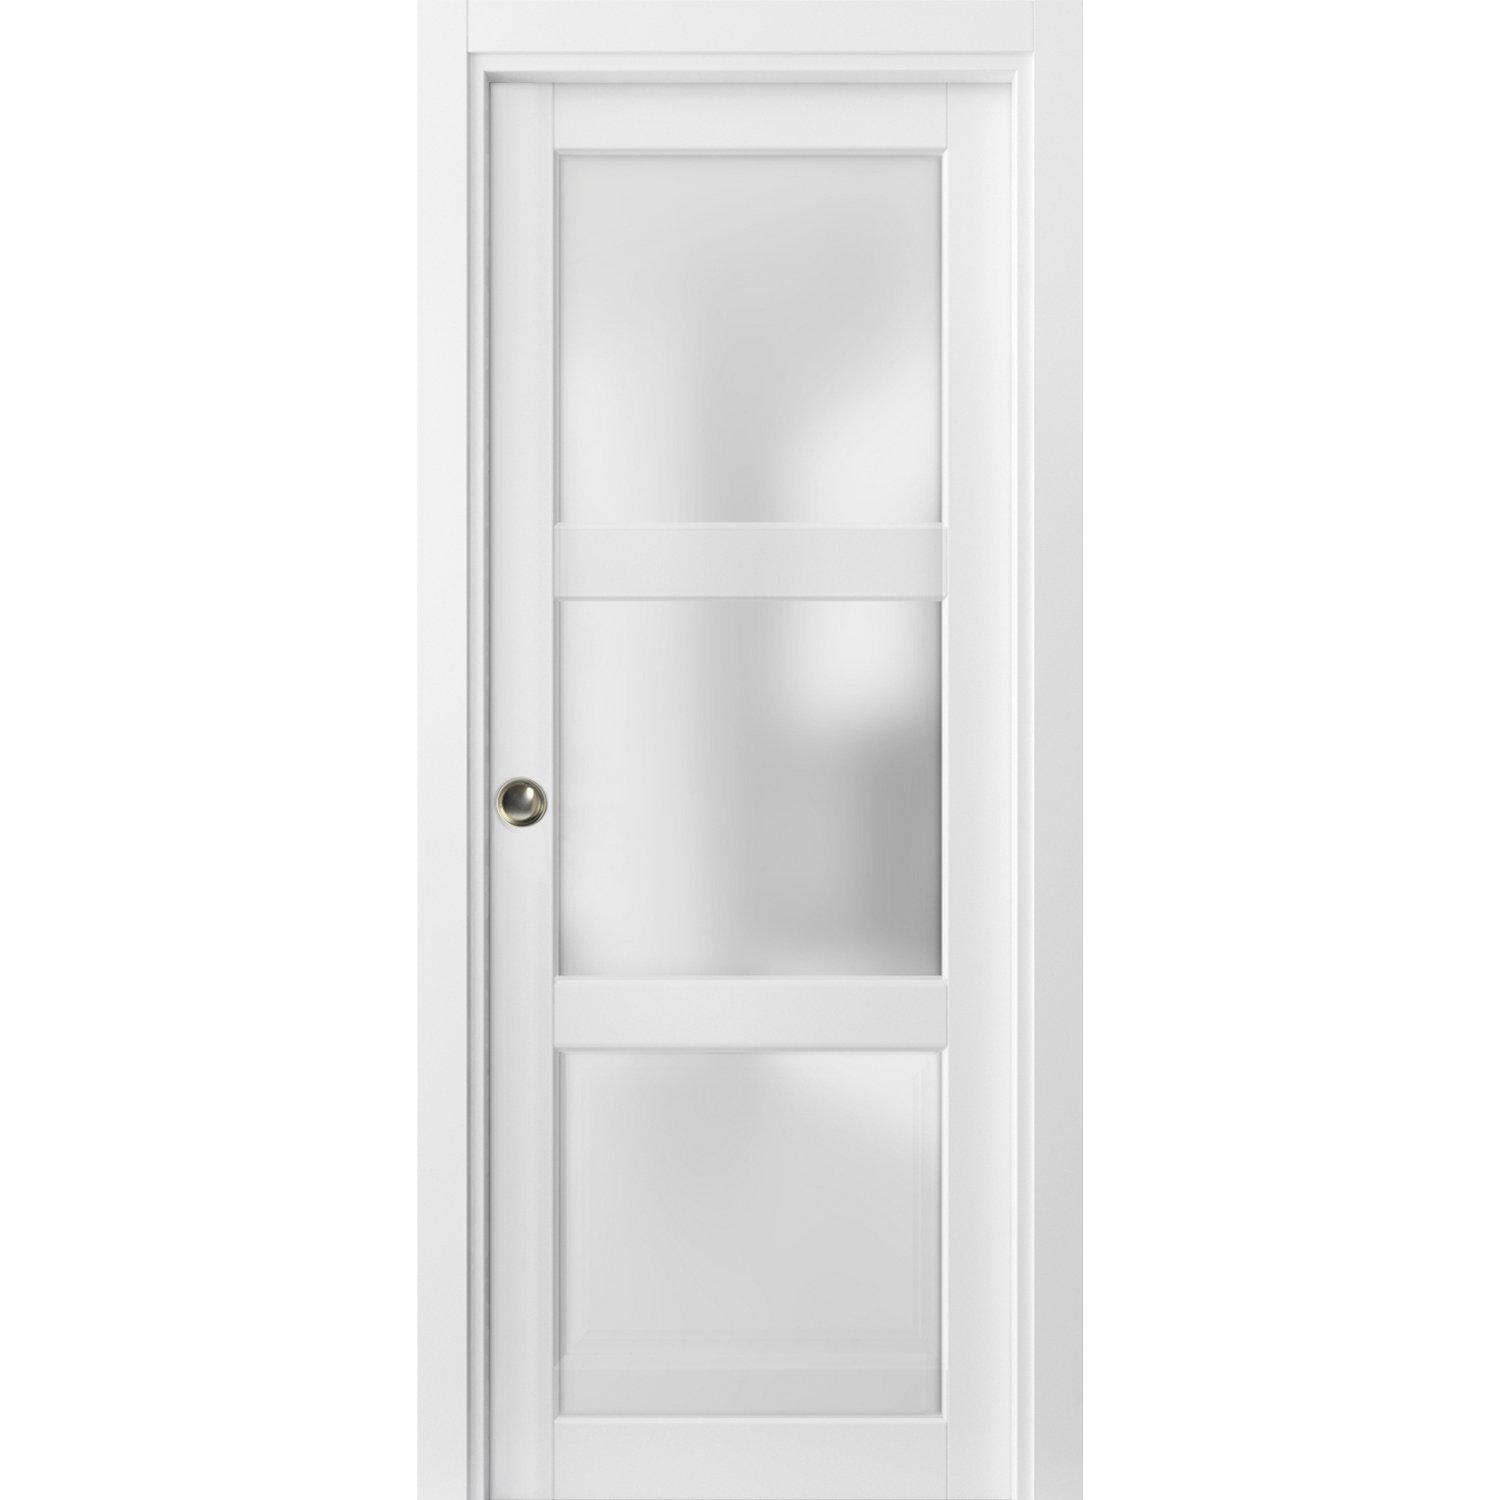 Panel Lite Pocket Door Frosted Glass | Lucia 2552 White Silk | Kit Trims Rail Hardware | Solid Wood 